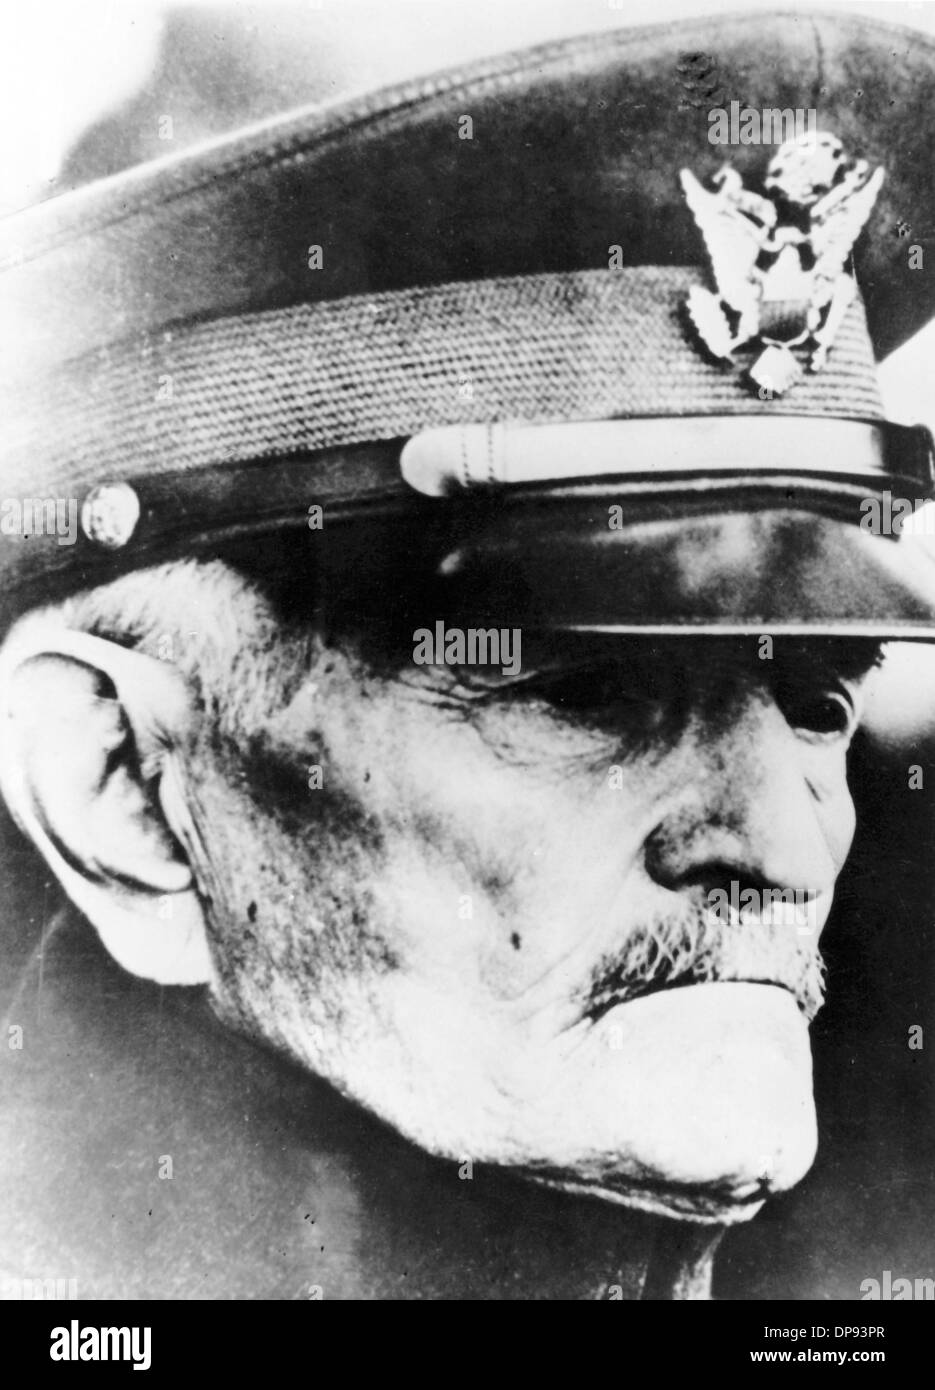 Portrait of the US-American General John J. Pershing published on the occasion of his death on 15 July 1948. Date and place unknown. Pershing was General of the Armies of the United States of America during World War I. Fotoarchiv für Zeitgeschichte Stock Photo